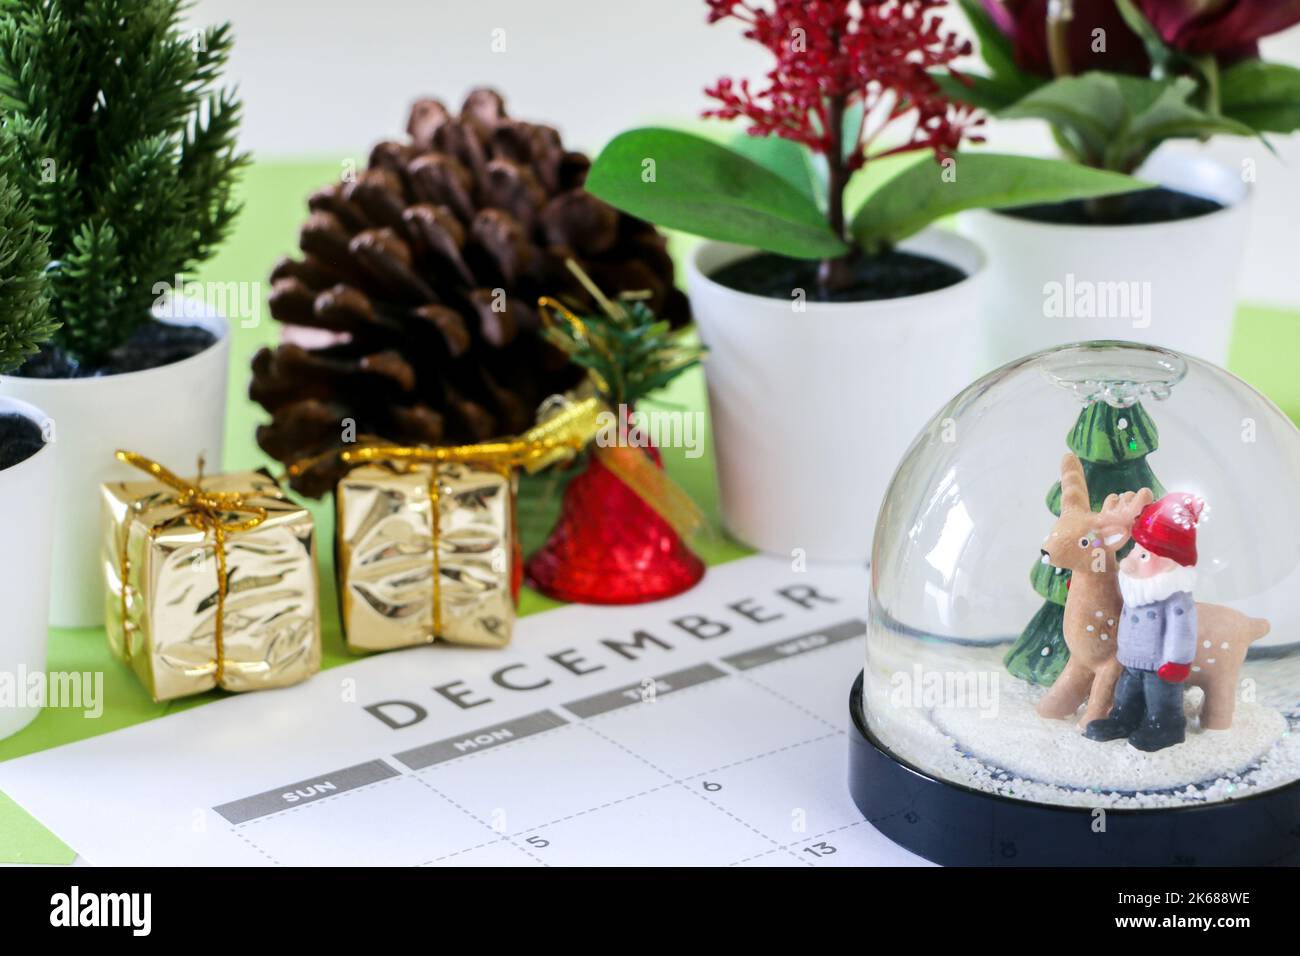 Christmas concept, festive snow globe on December calendar, out of focus in background are decorations such as plants, pine cone, gold wrapped gifts, Stock Photo